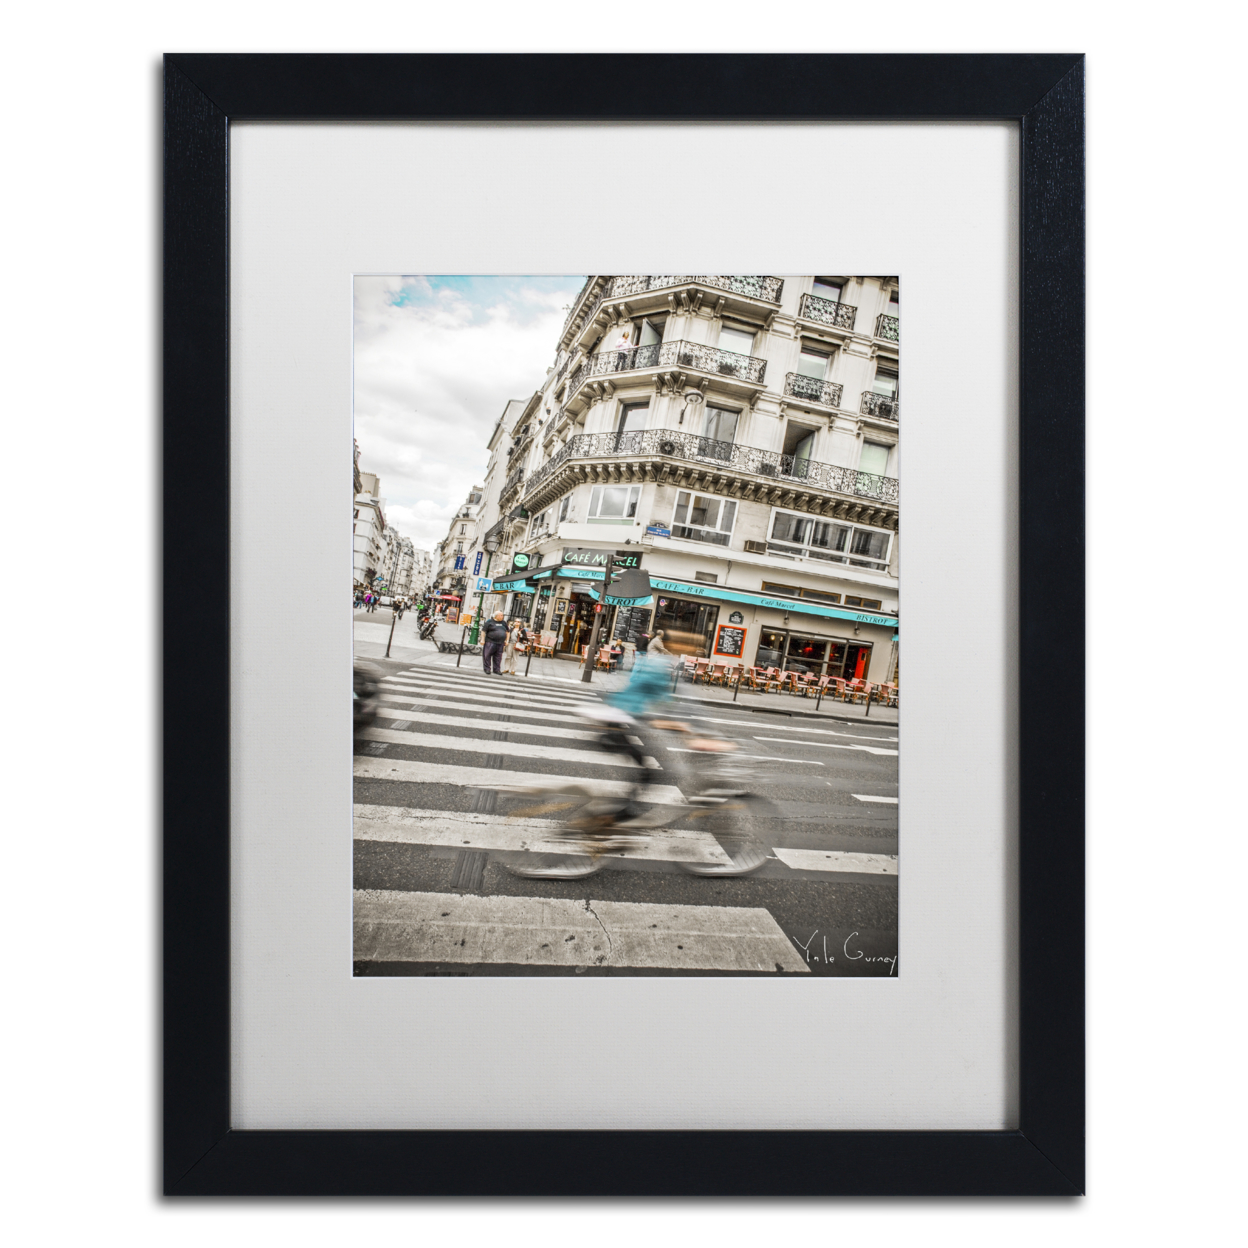 Yale Gurney 'Paris Bicycle Rider' Black Wooden Framed Art 18 X 22 Inches